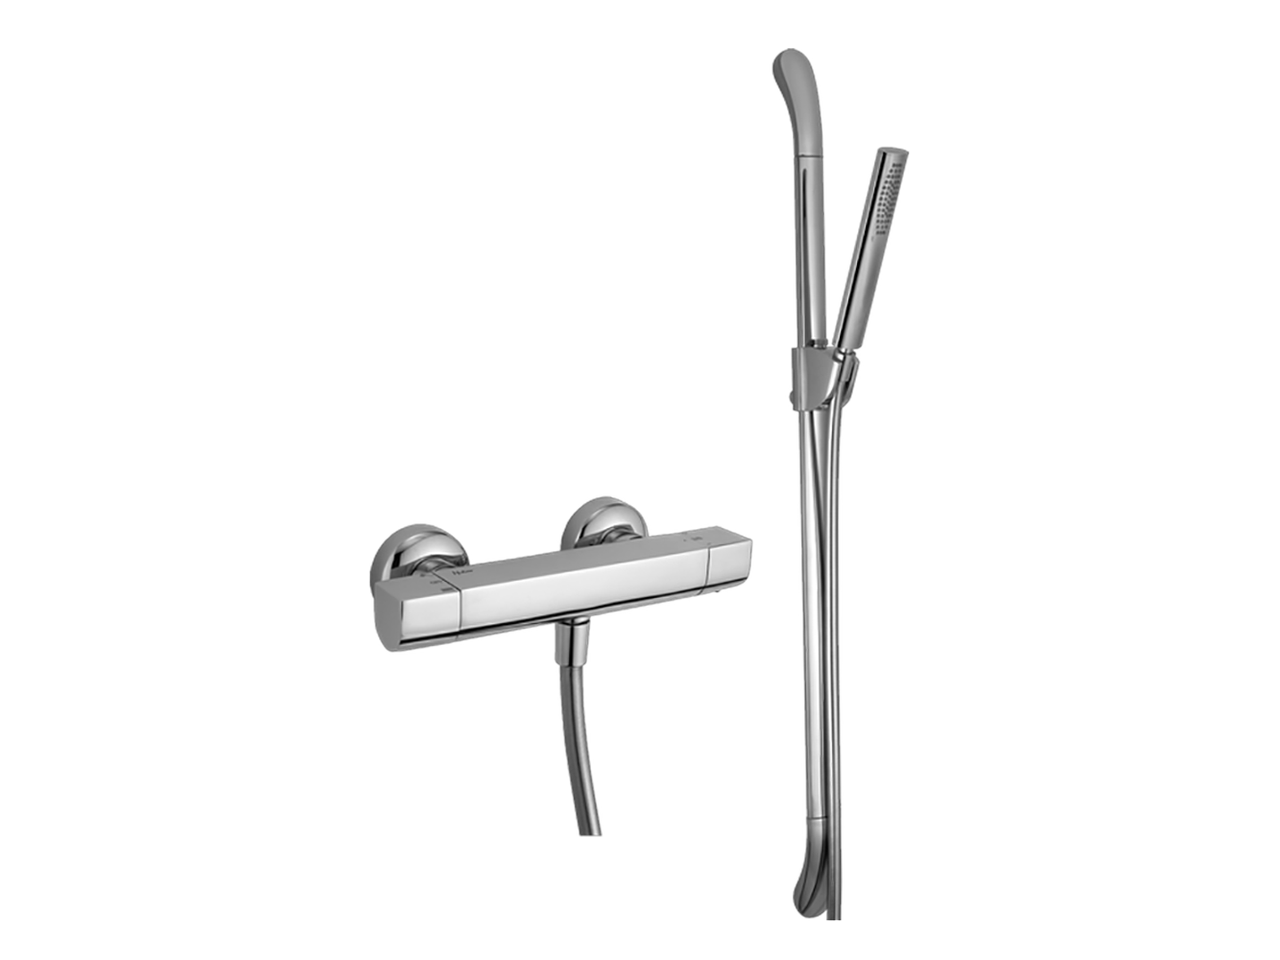 HUBERThermostatic shower mixer with sliding bar ICON